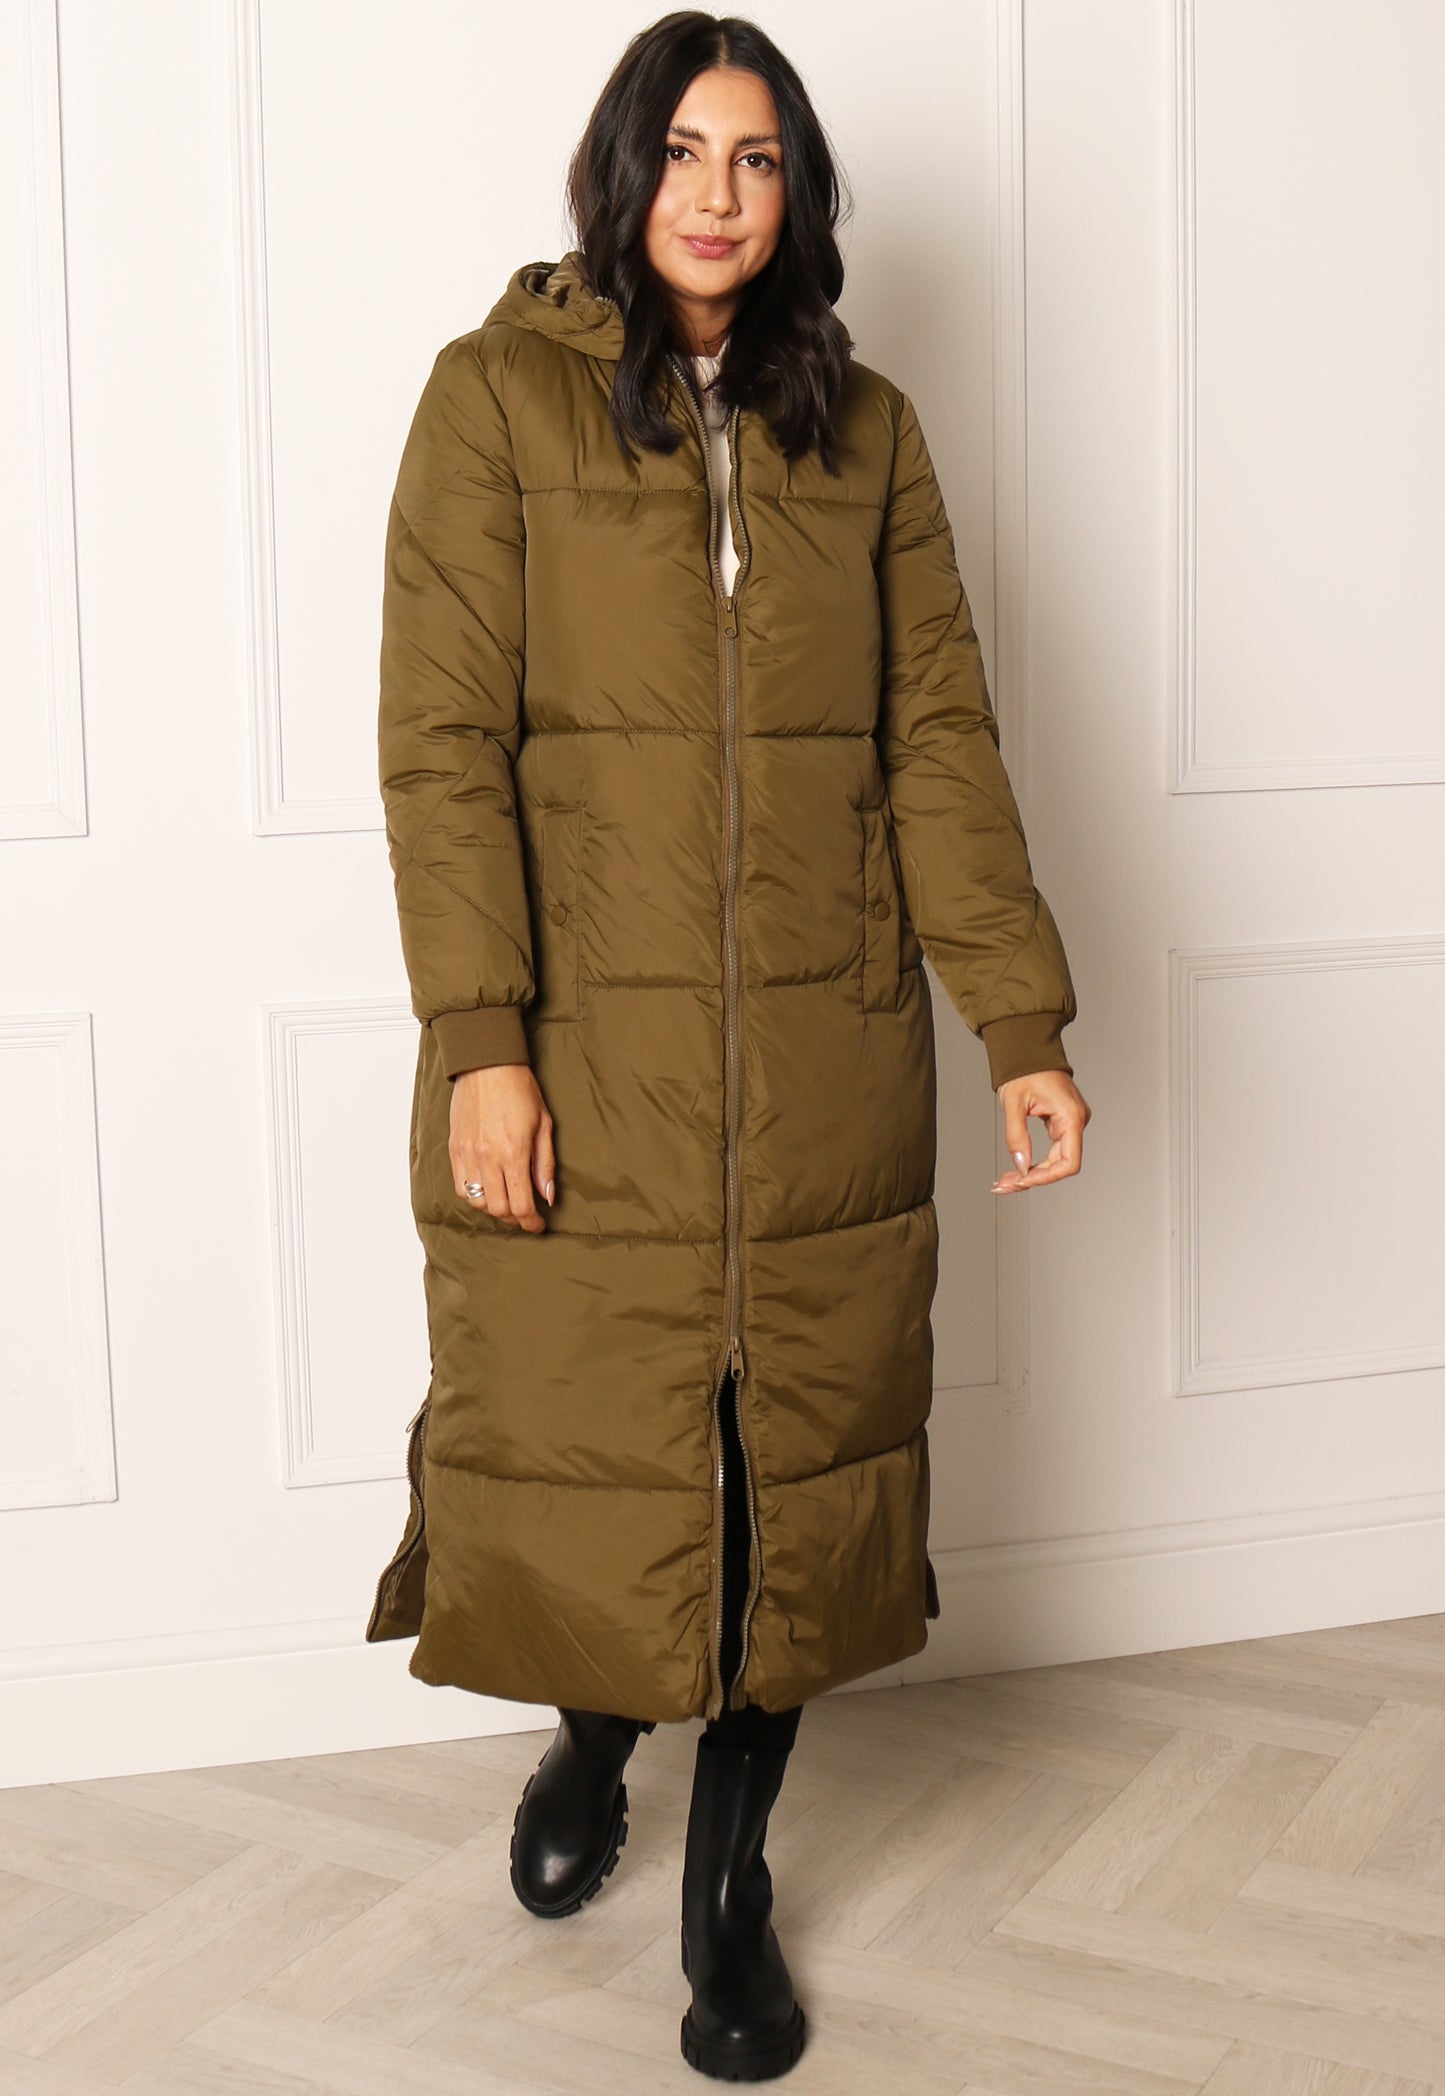 JDY Larvik Maxi Longline Hooded Quilted Puffer Coat in Khaki - concretebartops